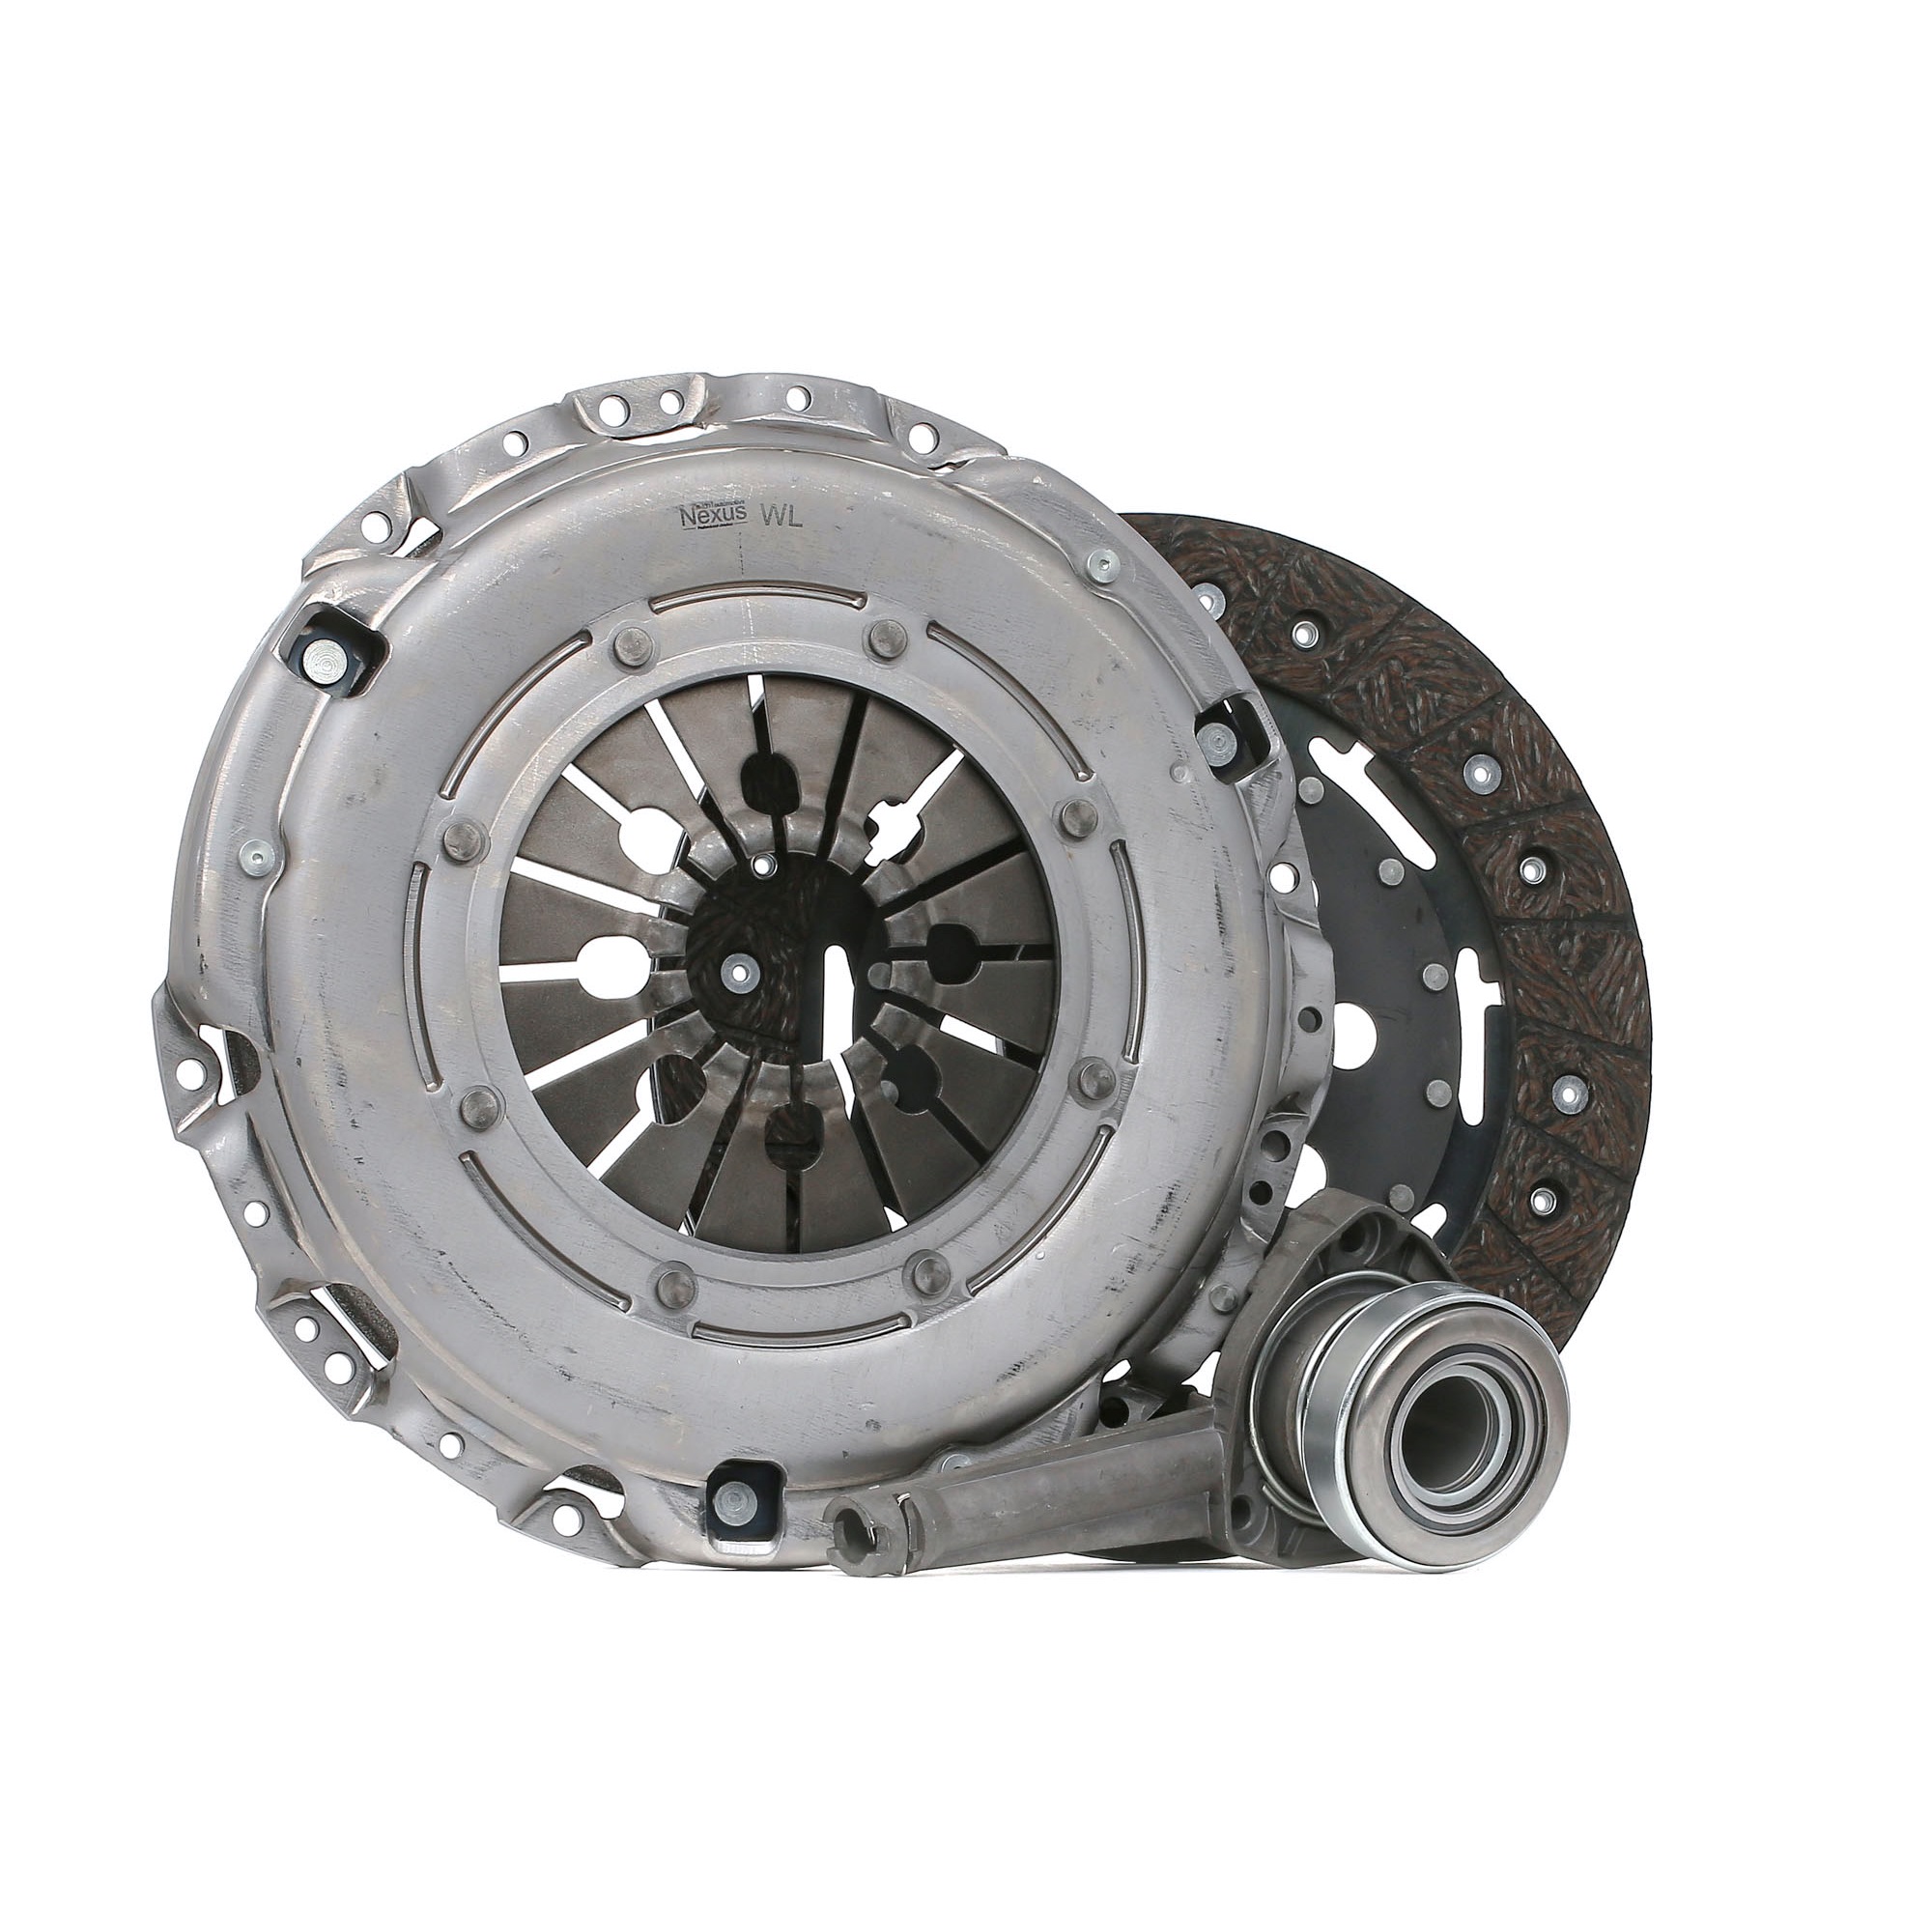 NEXUS F1R203NX Clutch kit RENAULT experience and price